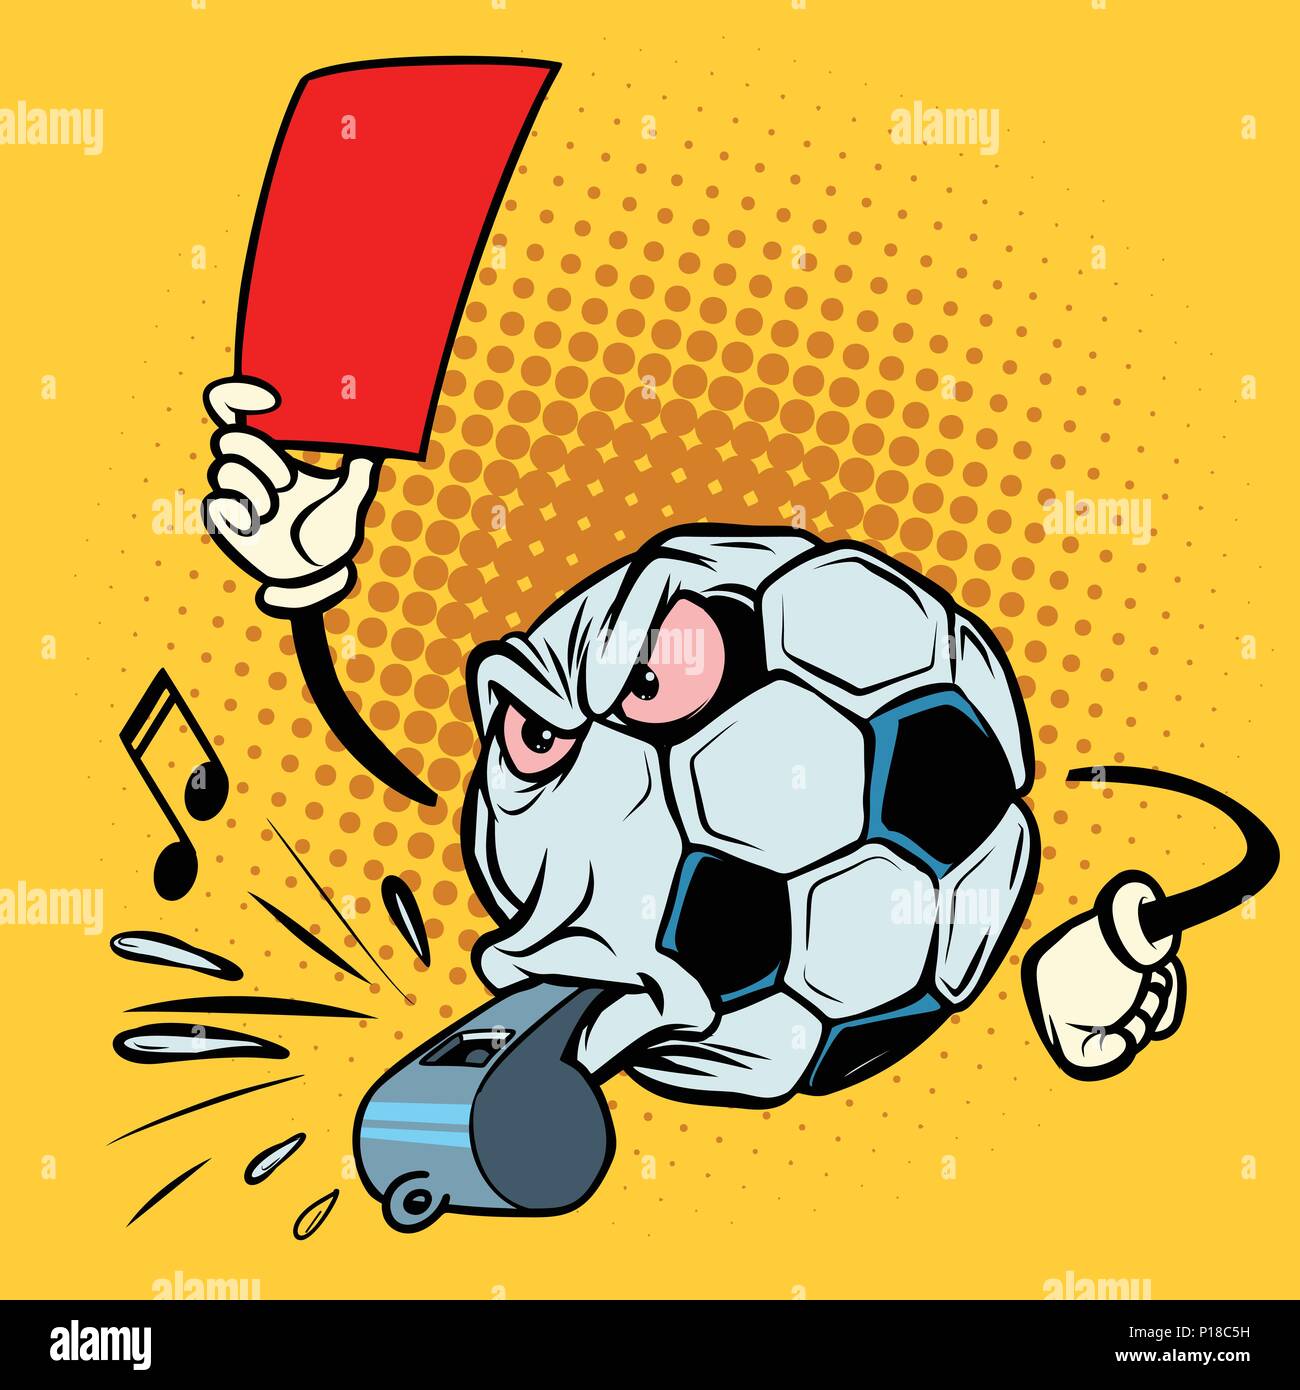 Red card referee whistle. Football soccer ball. Funny character Stock Vector